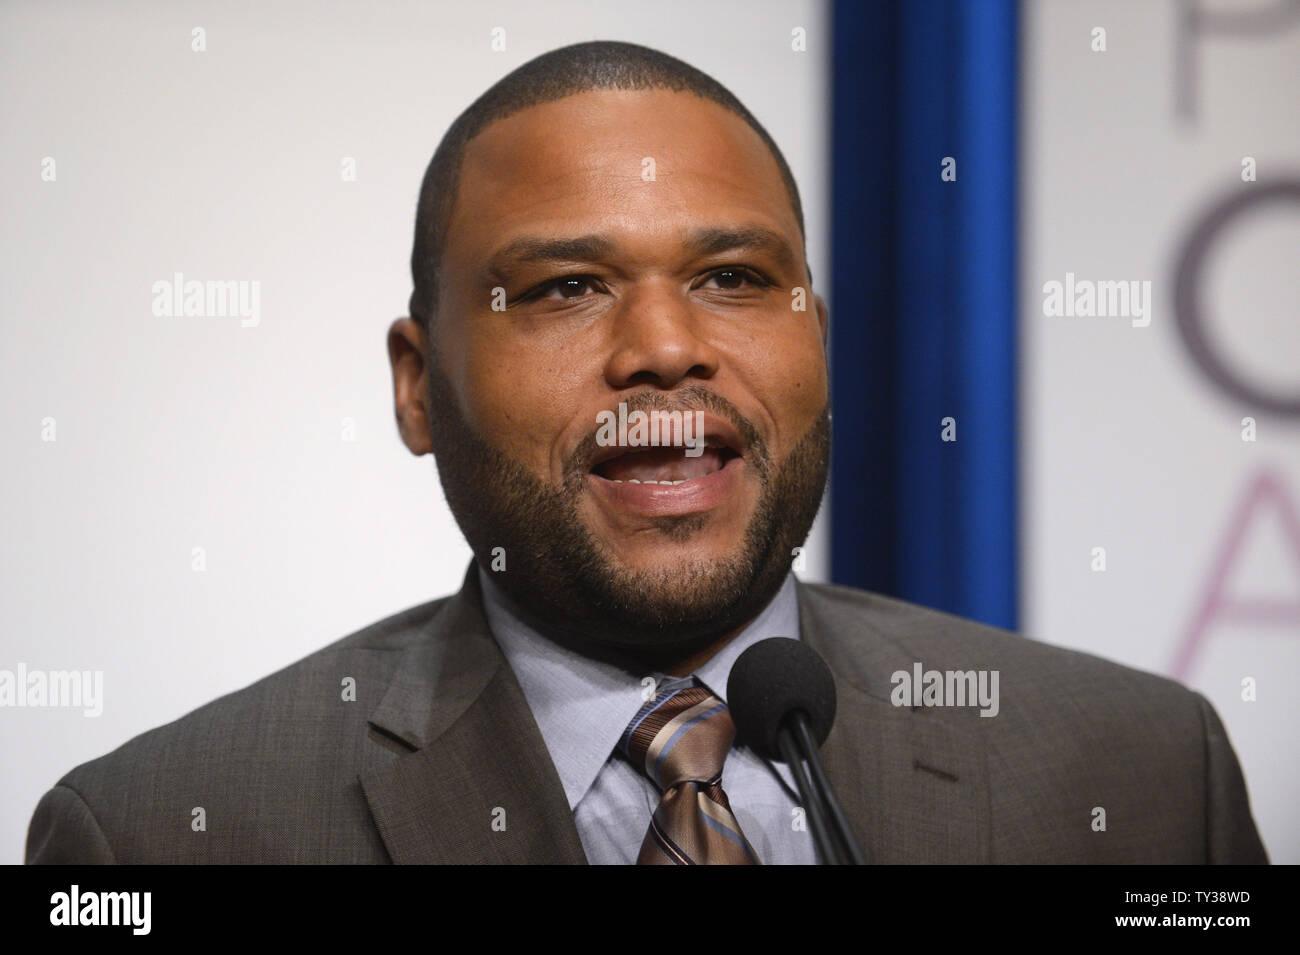 Actor Anthony Anderson participates in the People's Choice Awards 2013 Nomination Announcements held at the Paley Center for Media in Beverly Hills, California on November 15, 2012. The awards will be presented on January 9, 2013.      UPI/Phil McCarten Stock Photo